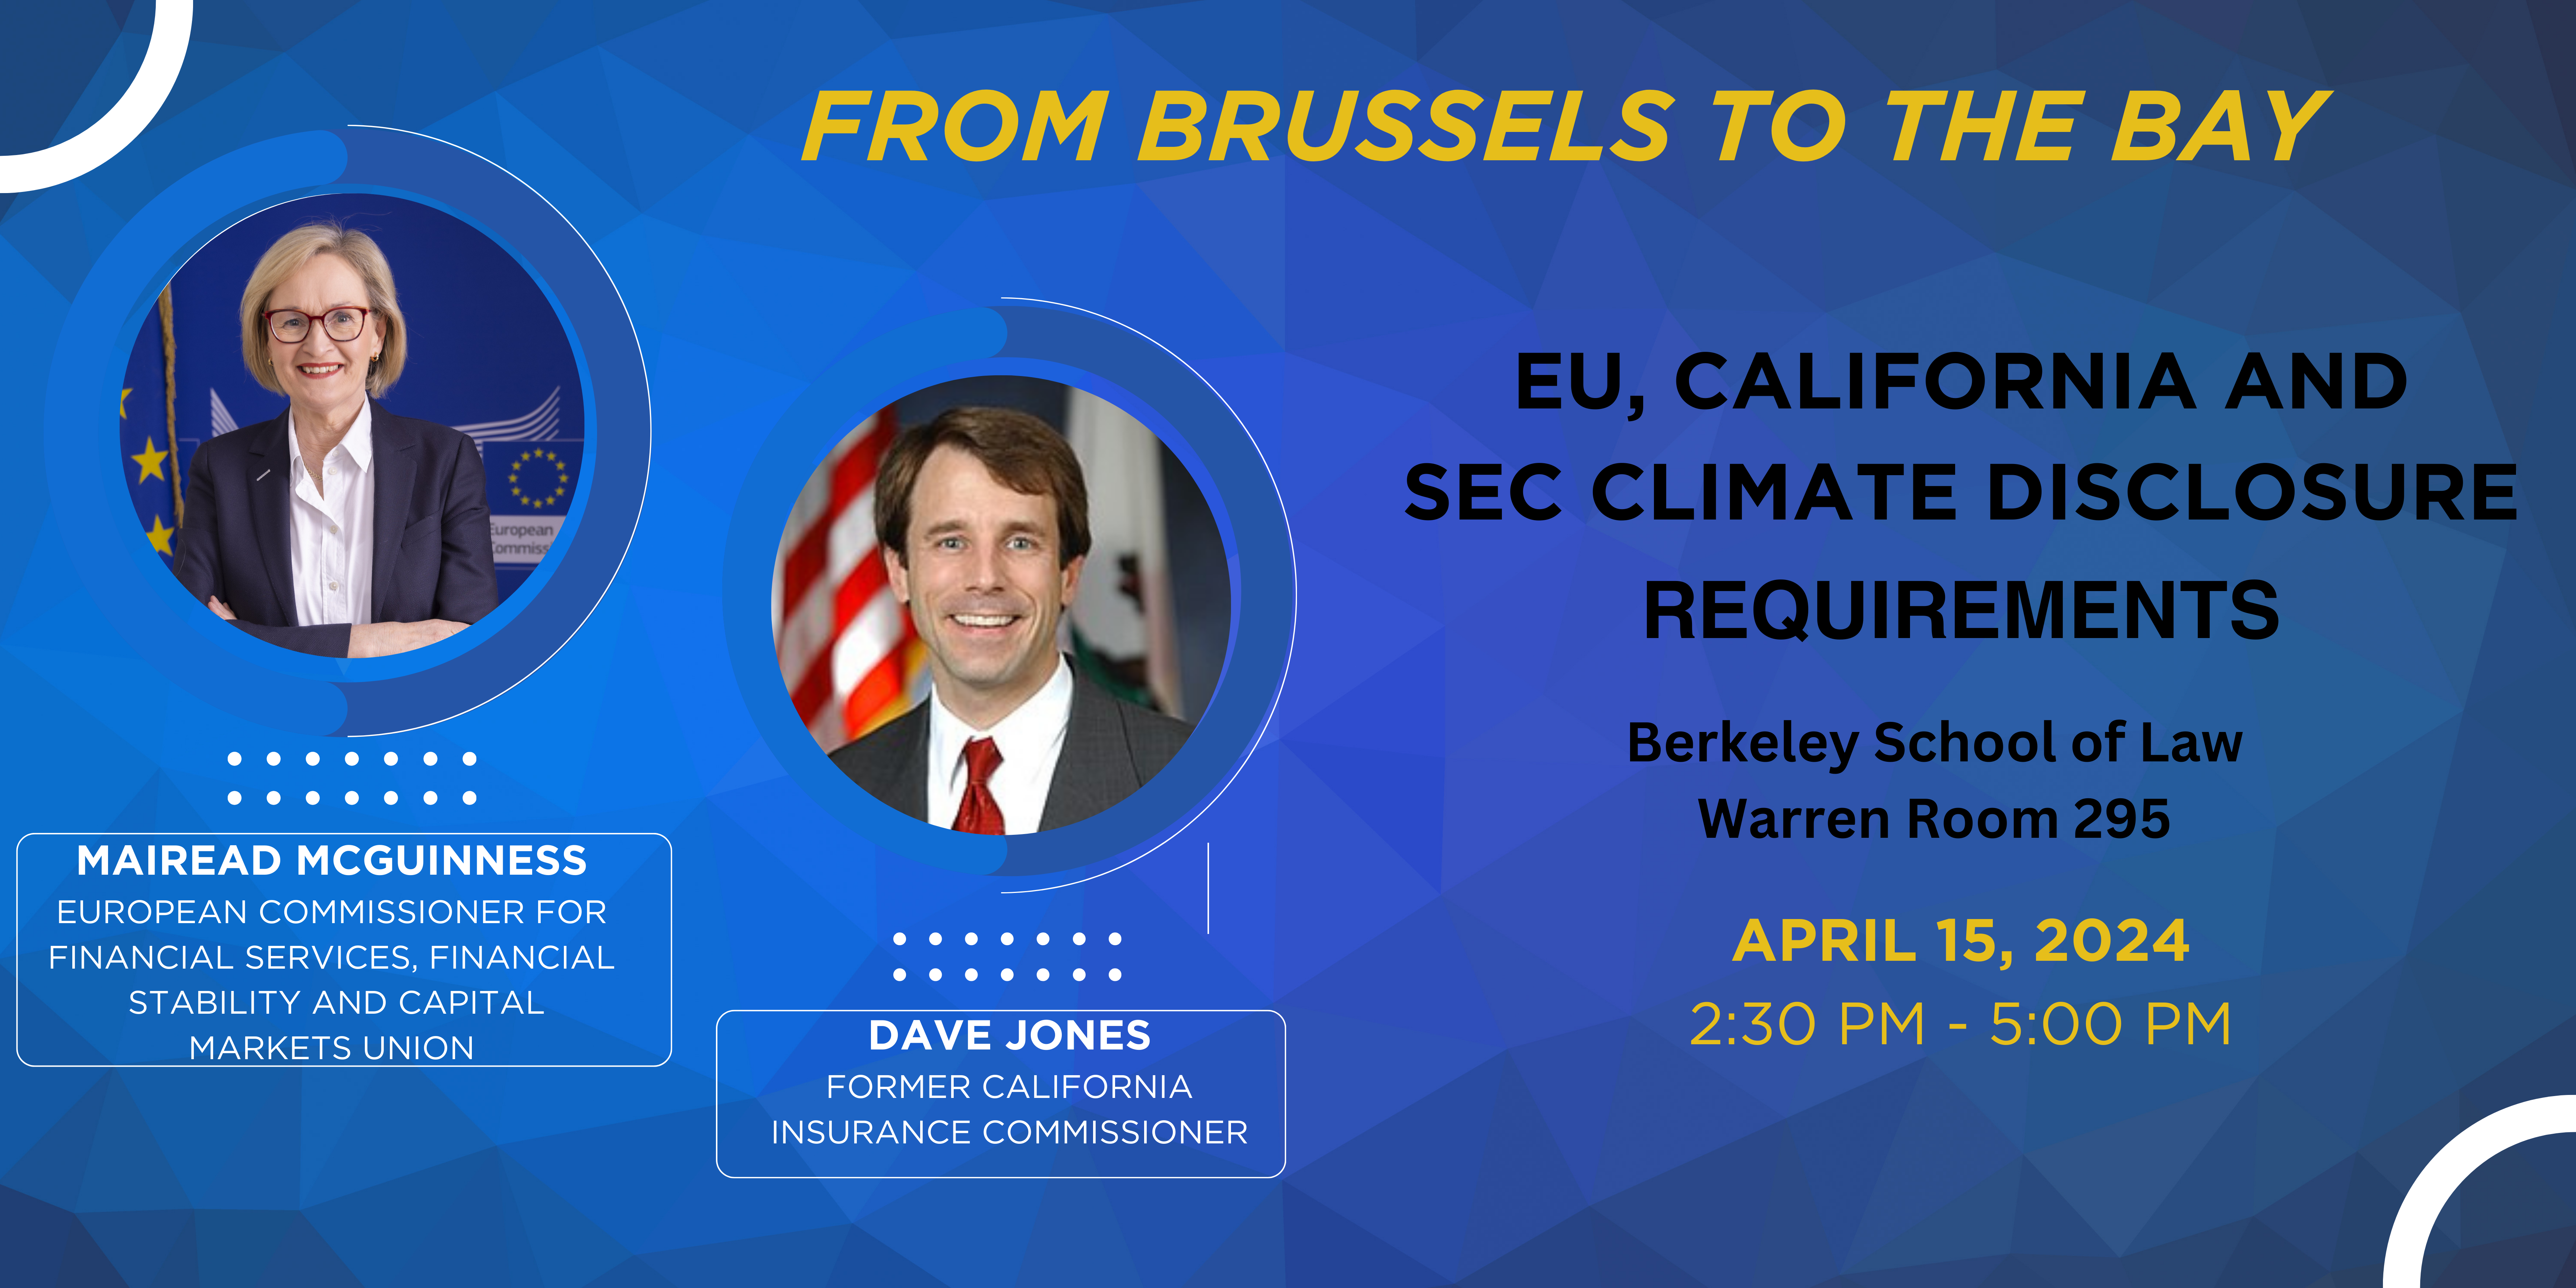 From Brussels to the Bay: EU, California, and SEC Climate Risk Disclosure Rules on a blue background with speakers Mairead McGuinness and Dave Jones shown on the left